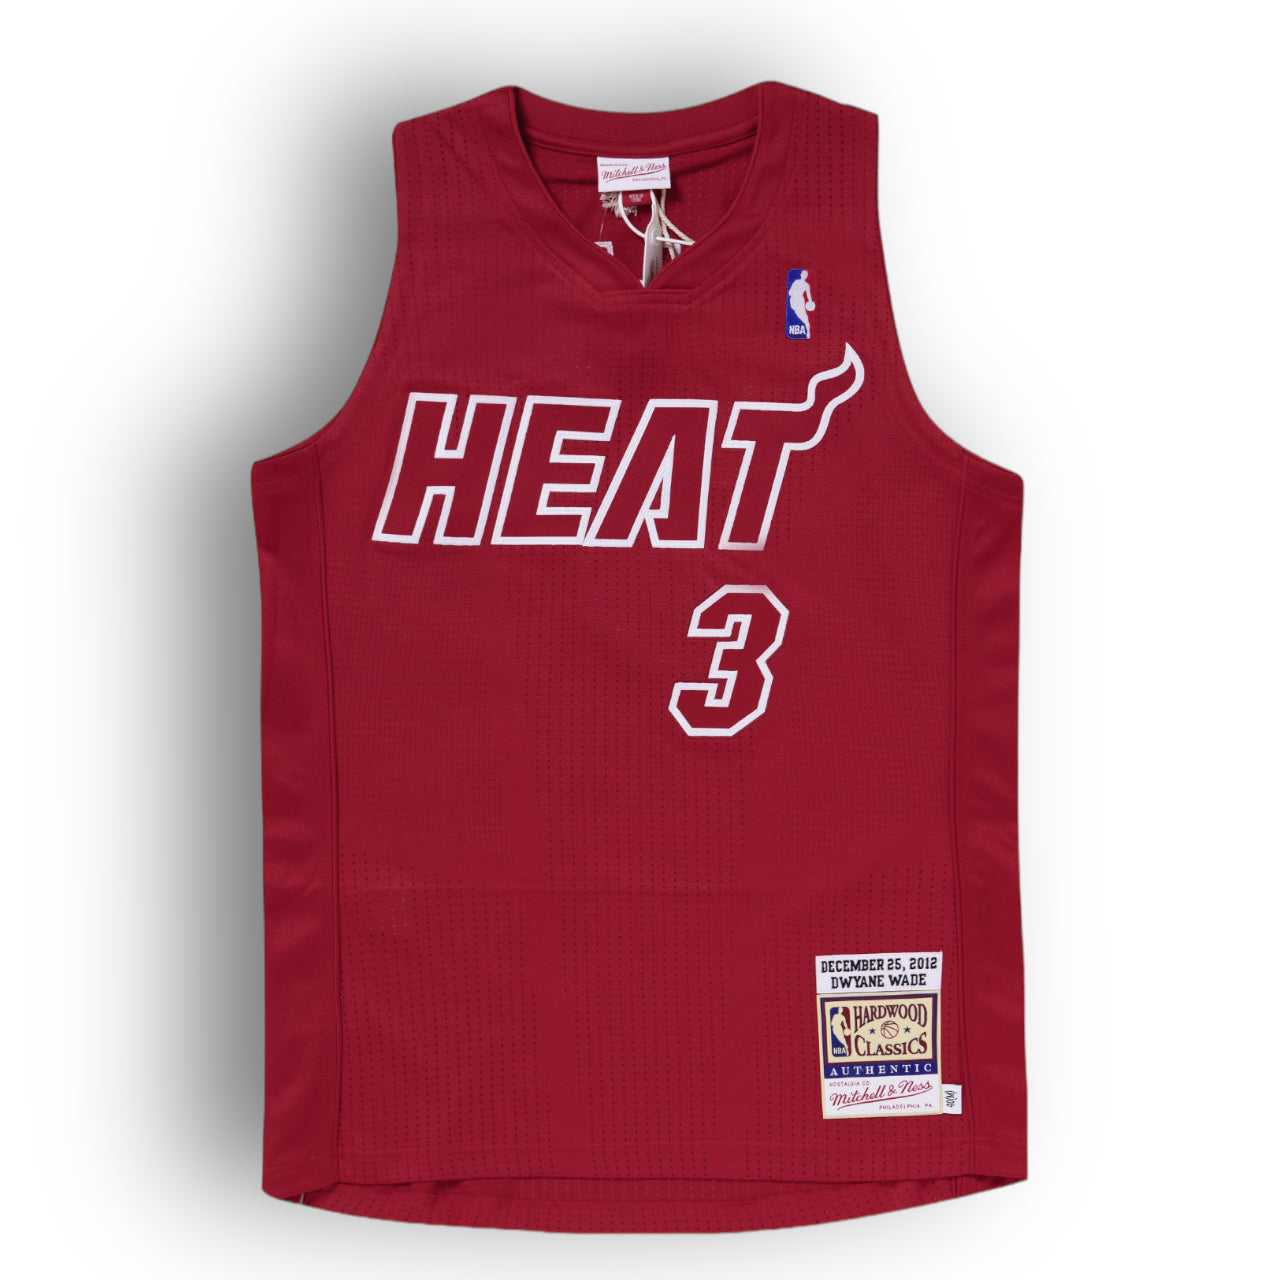 Mitchell and Ness Dwyane Wade Miami Heat 2012 Christmas Game Xmas Big Color Authentic Jersey - Red - Hoop Jersey Store